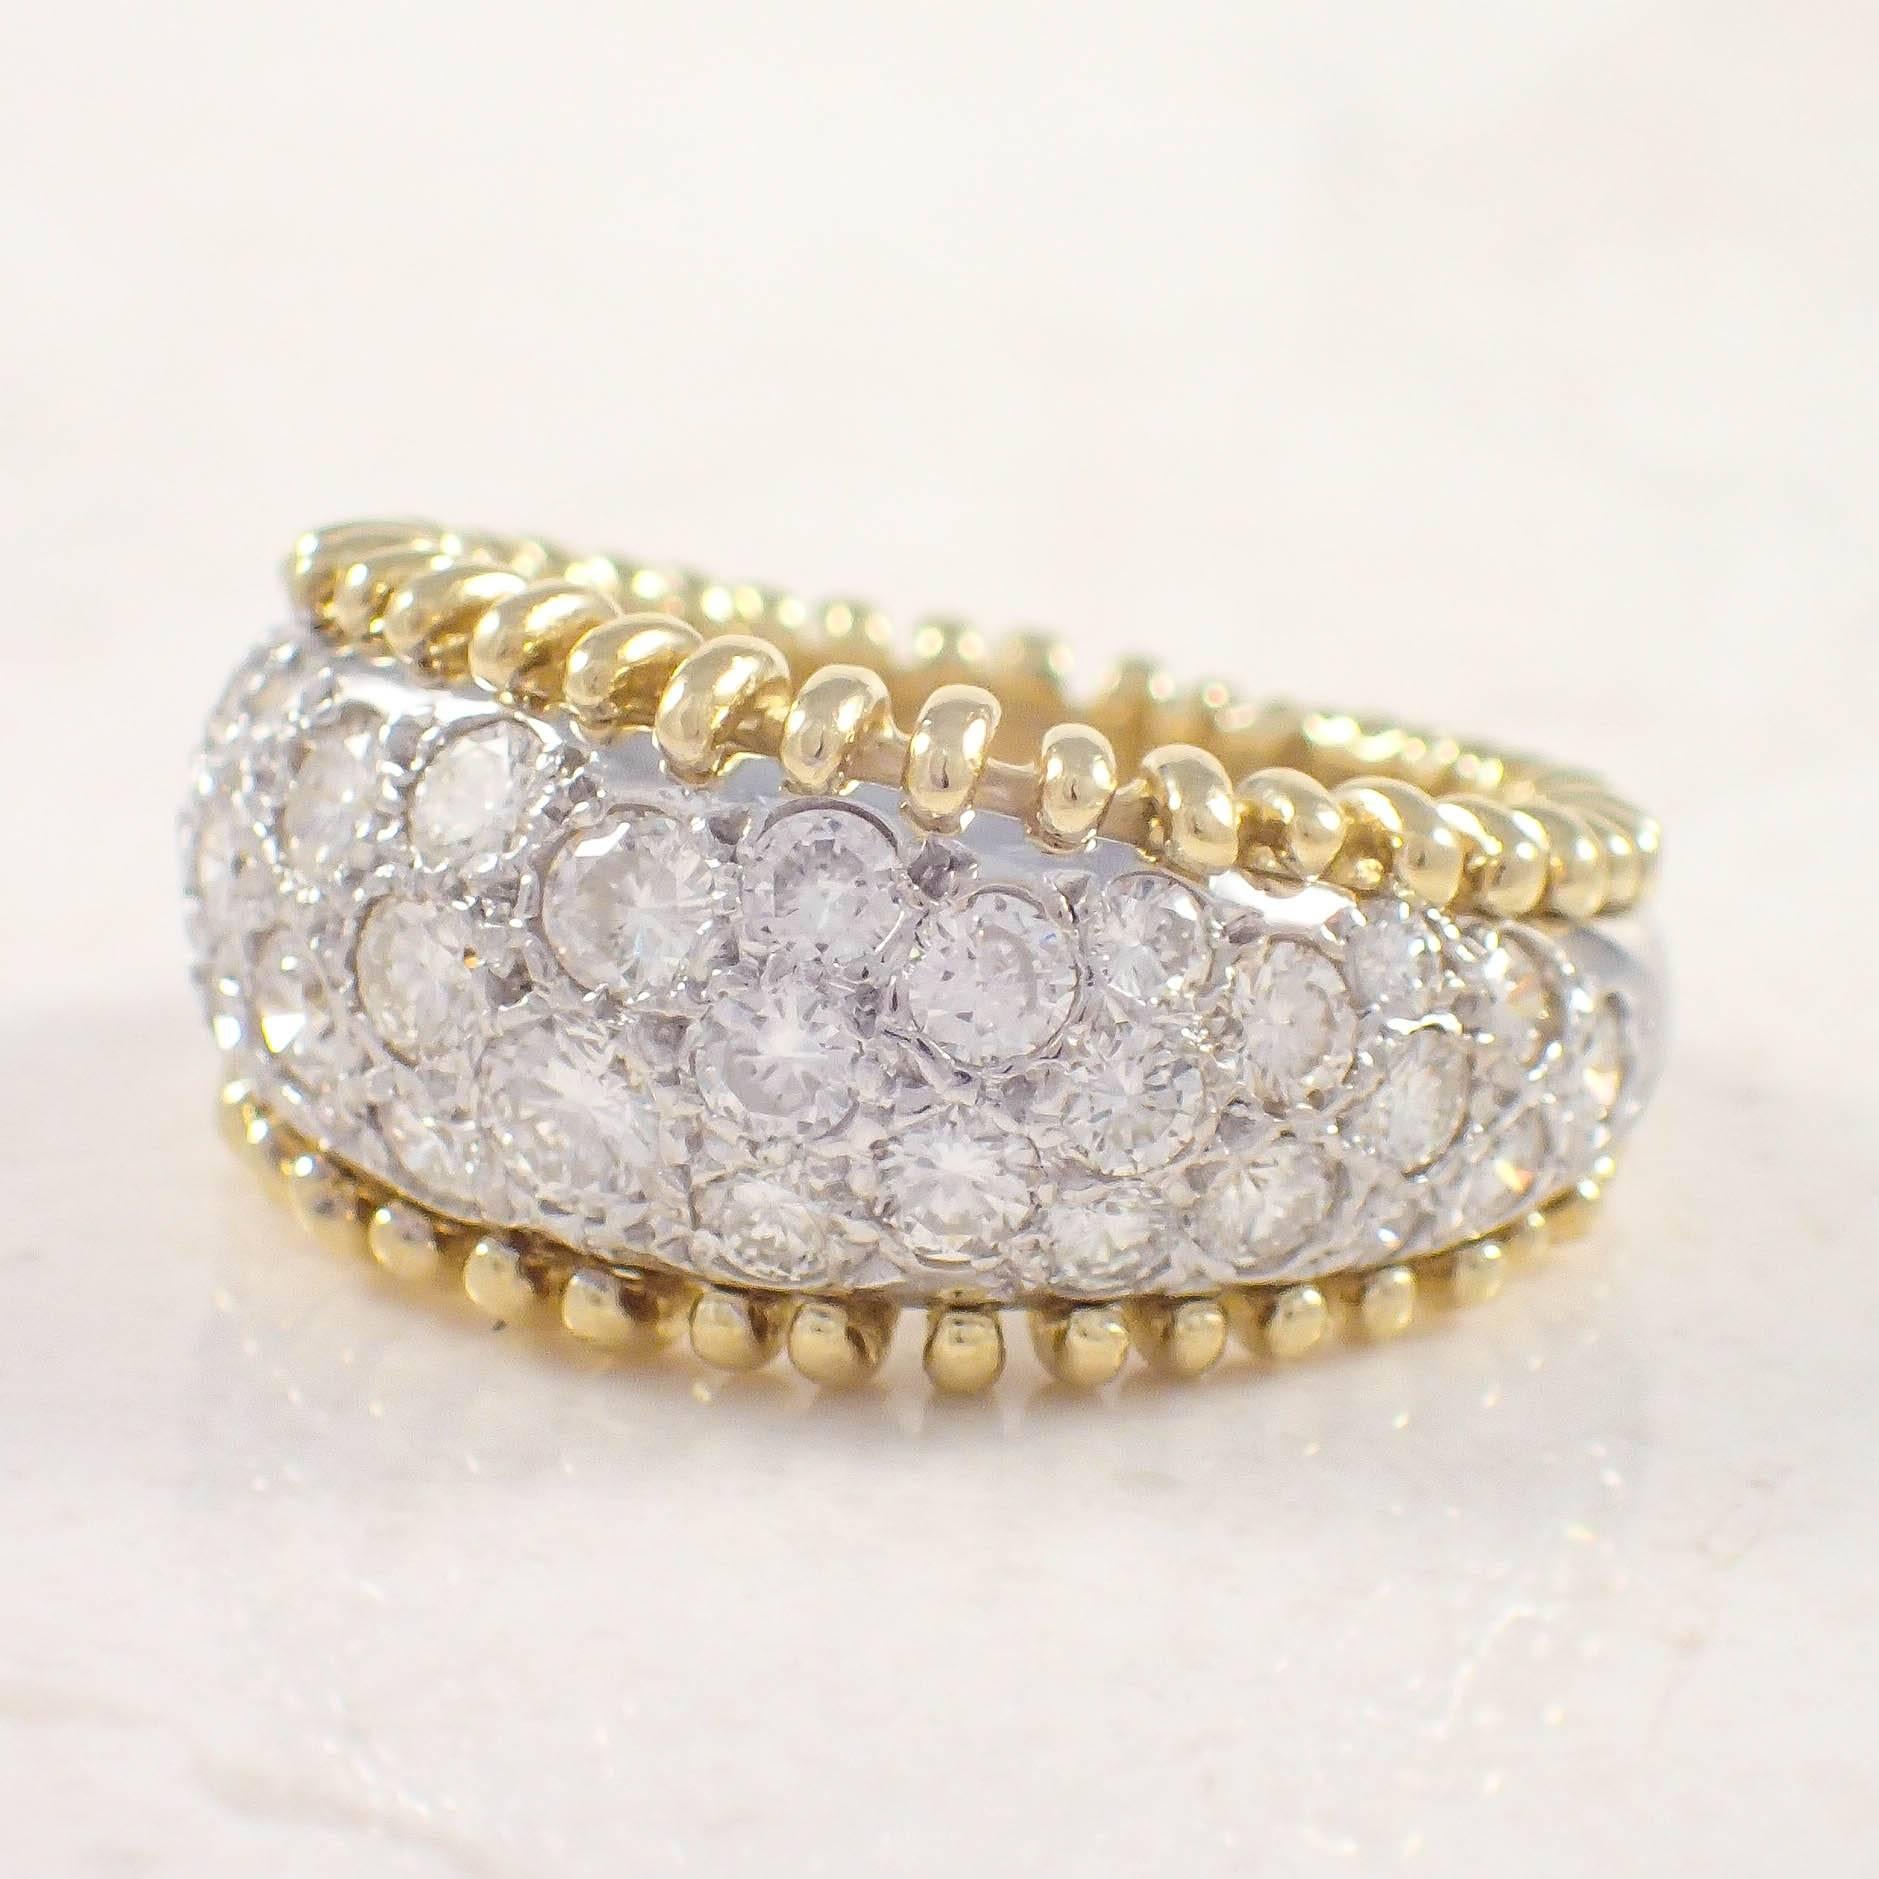 18K Yellow and white gold diamond band. The domed band is pave set with 38 round diamonds weighing approximately 2.50 carats total. The band weighs 9.9 grams. 
Circa 1980s

Color: G-H
Clarity: SI 